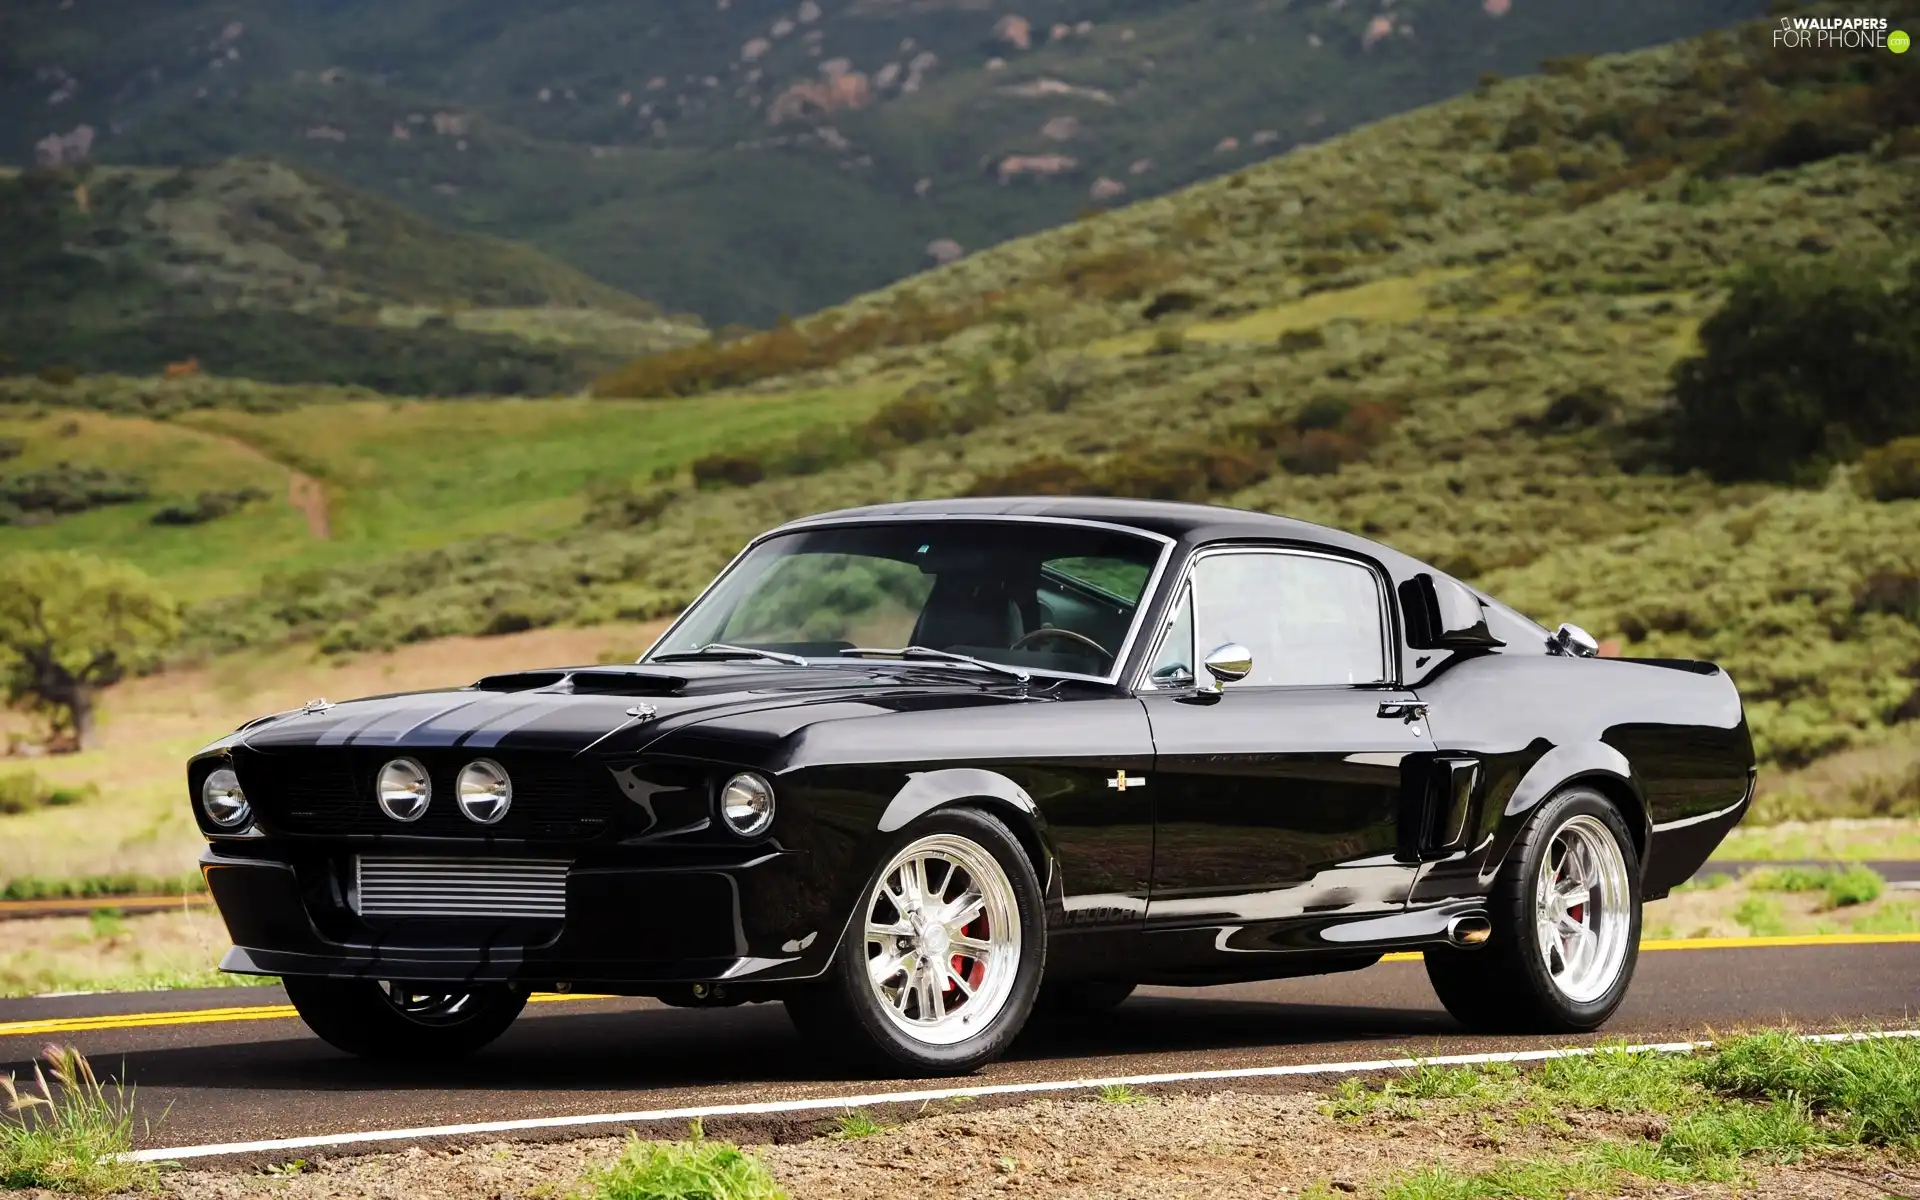 Black, Ford Mustang